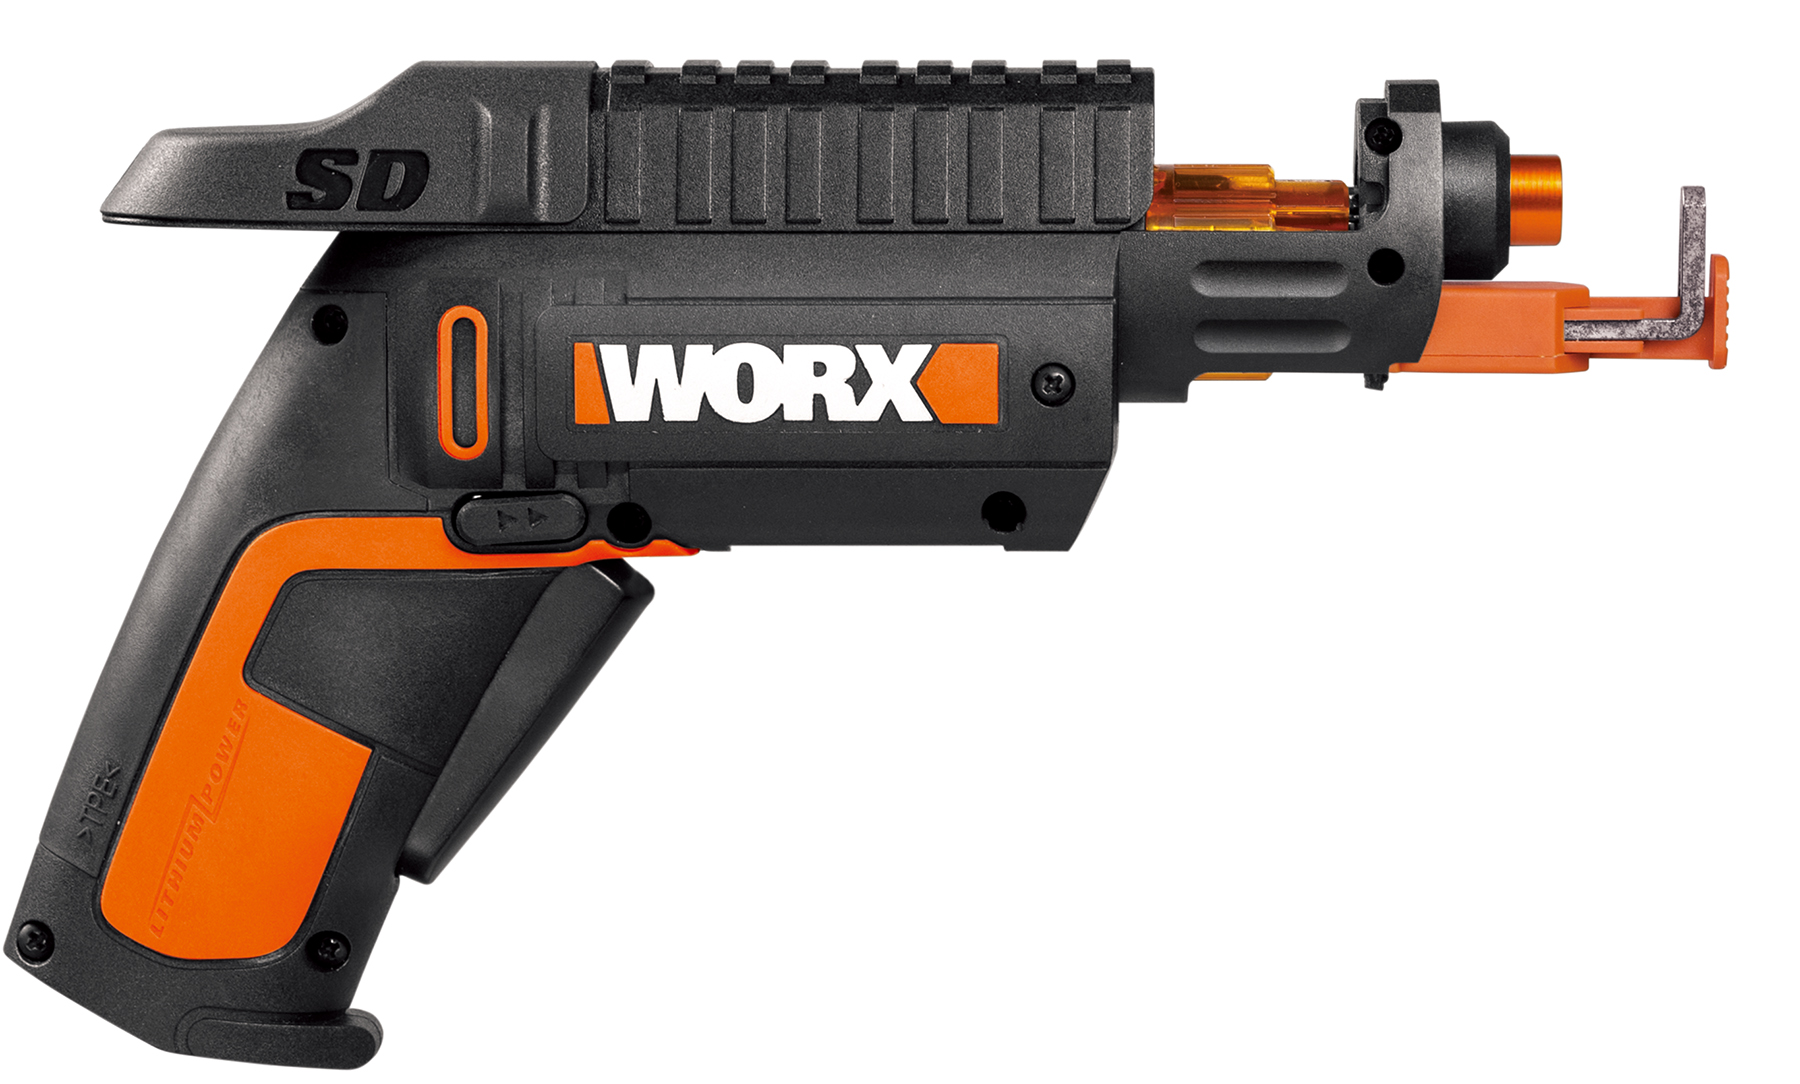 WORX SD Driver with Screw Holder